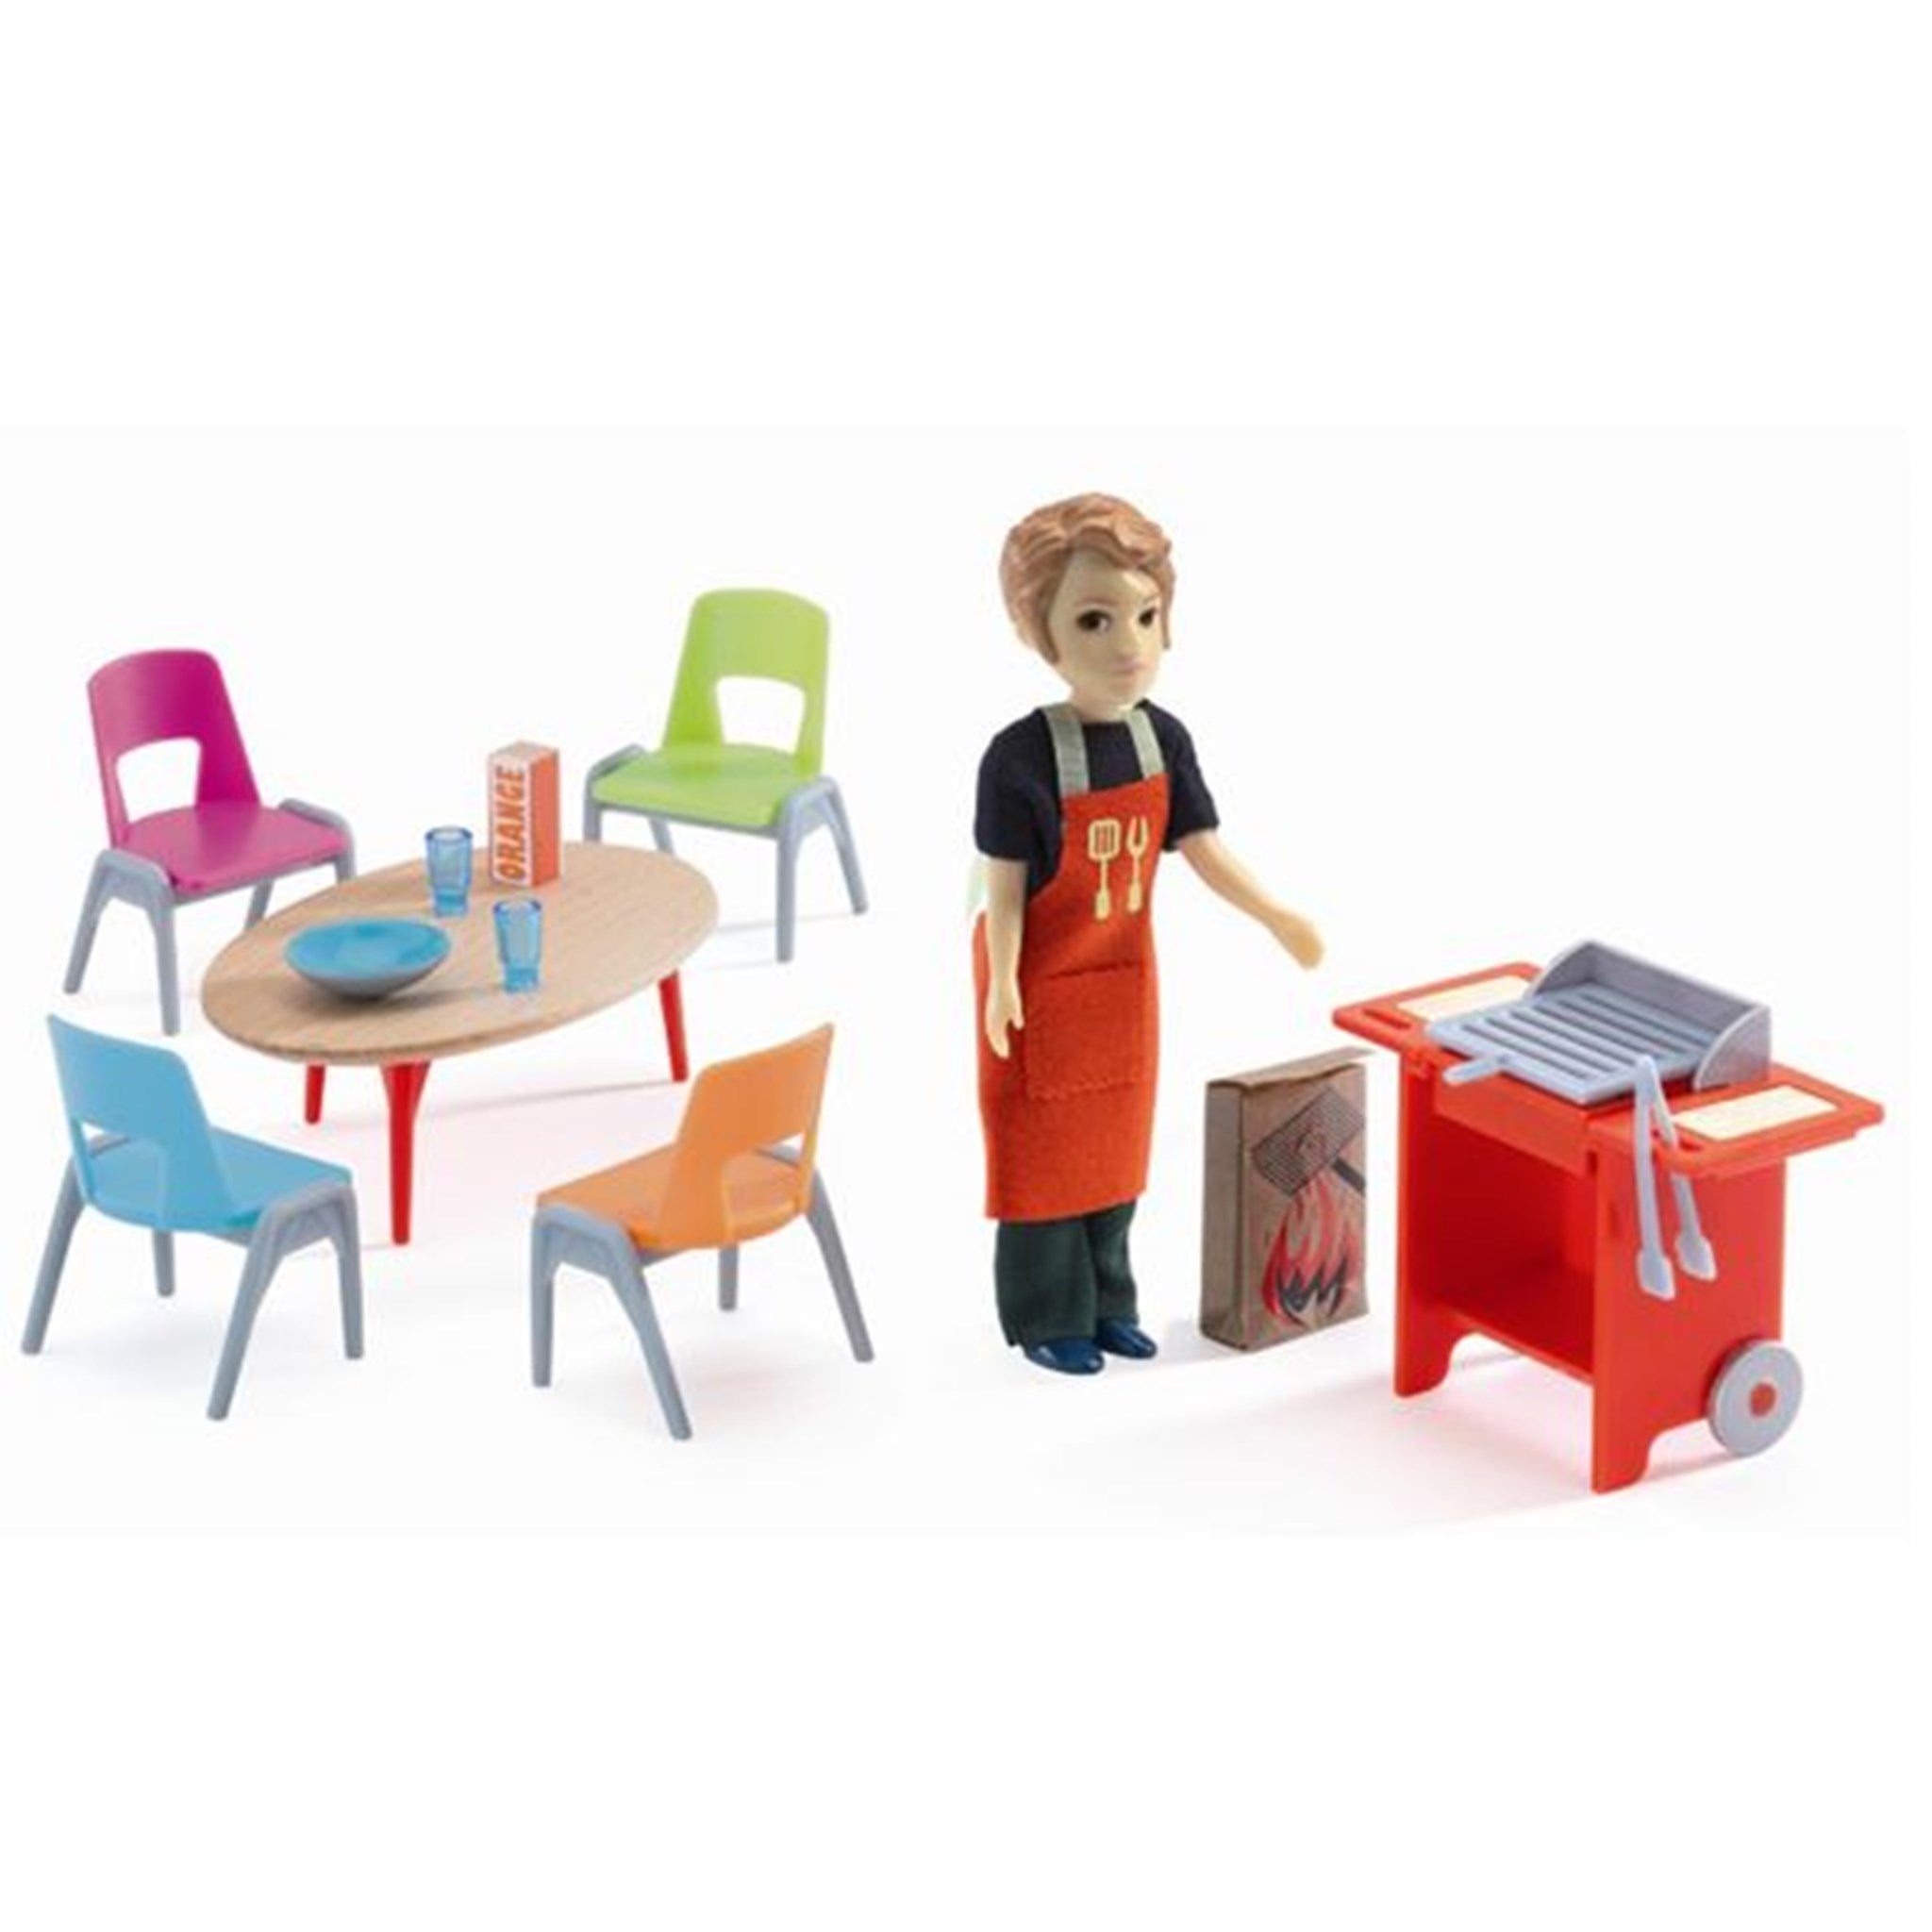 Djeco Petit Home Barbecue and Accessories